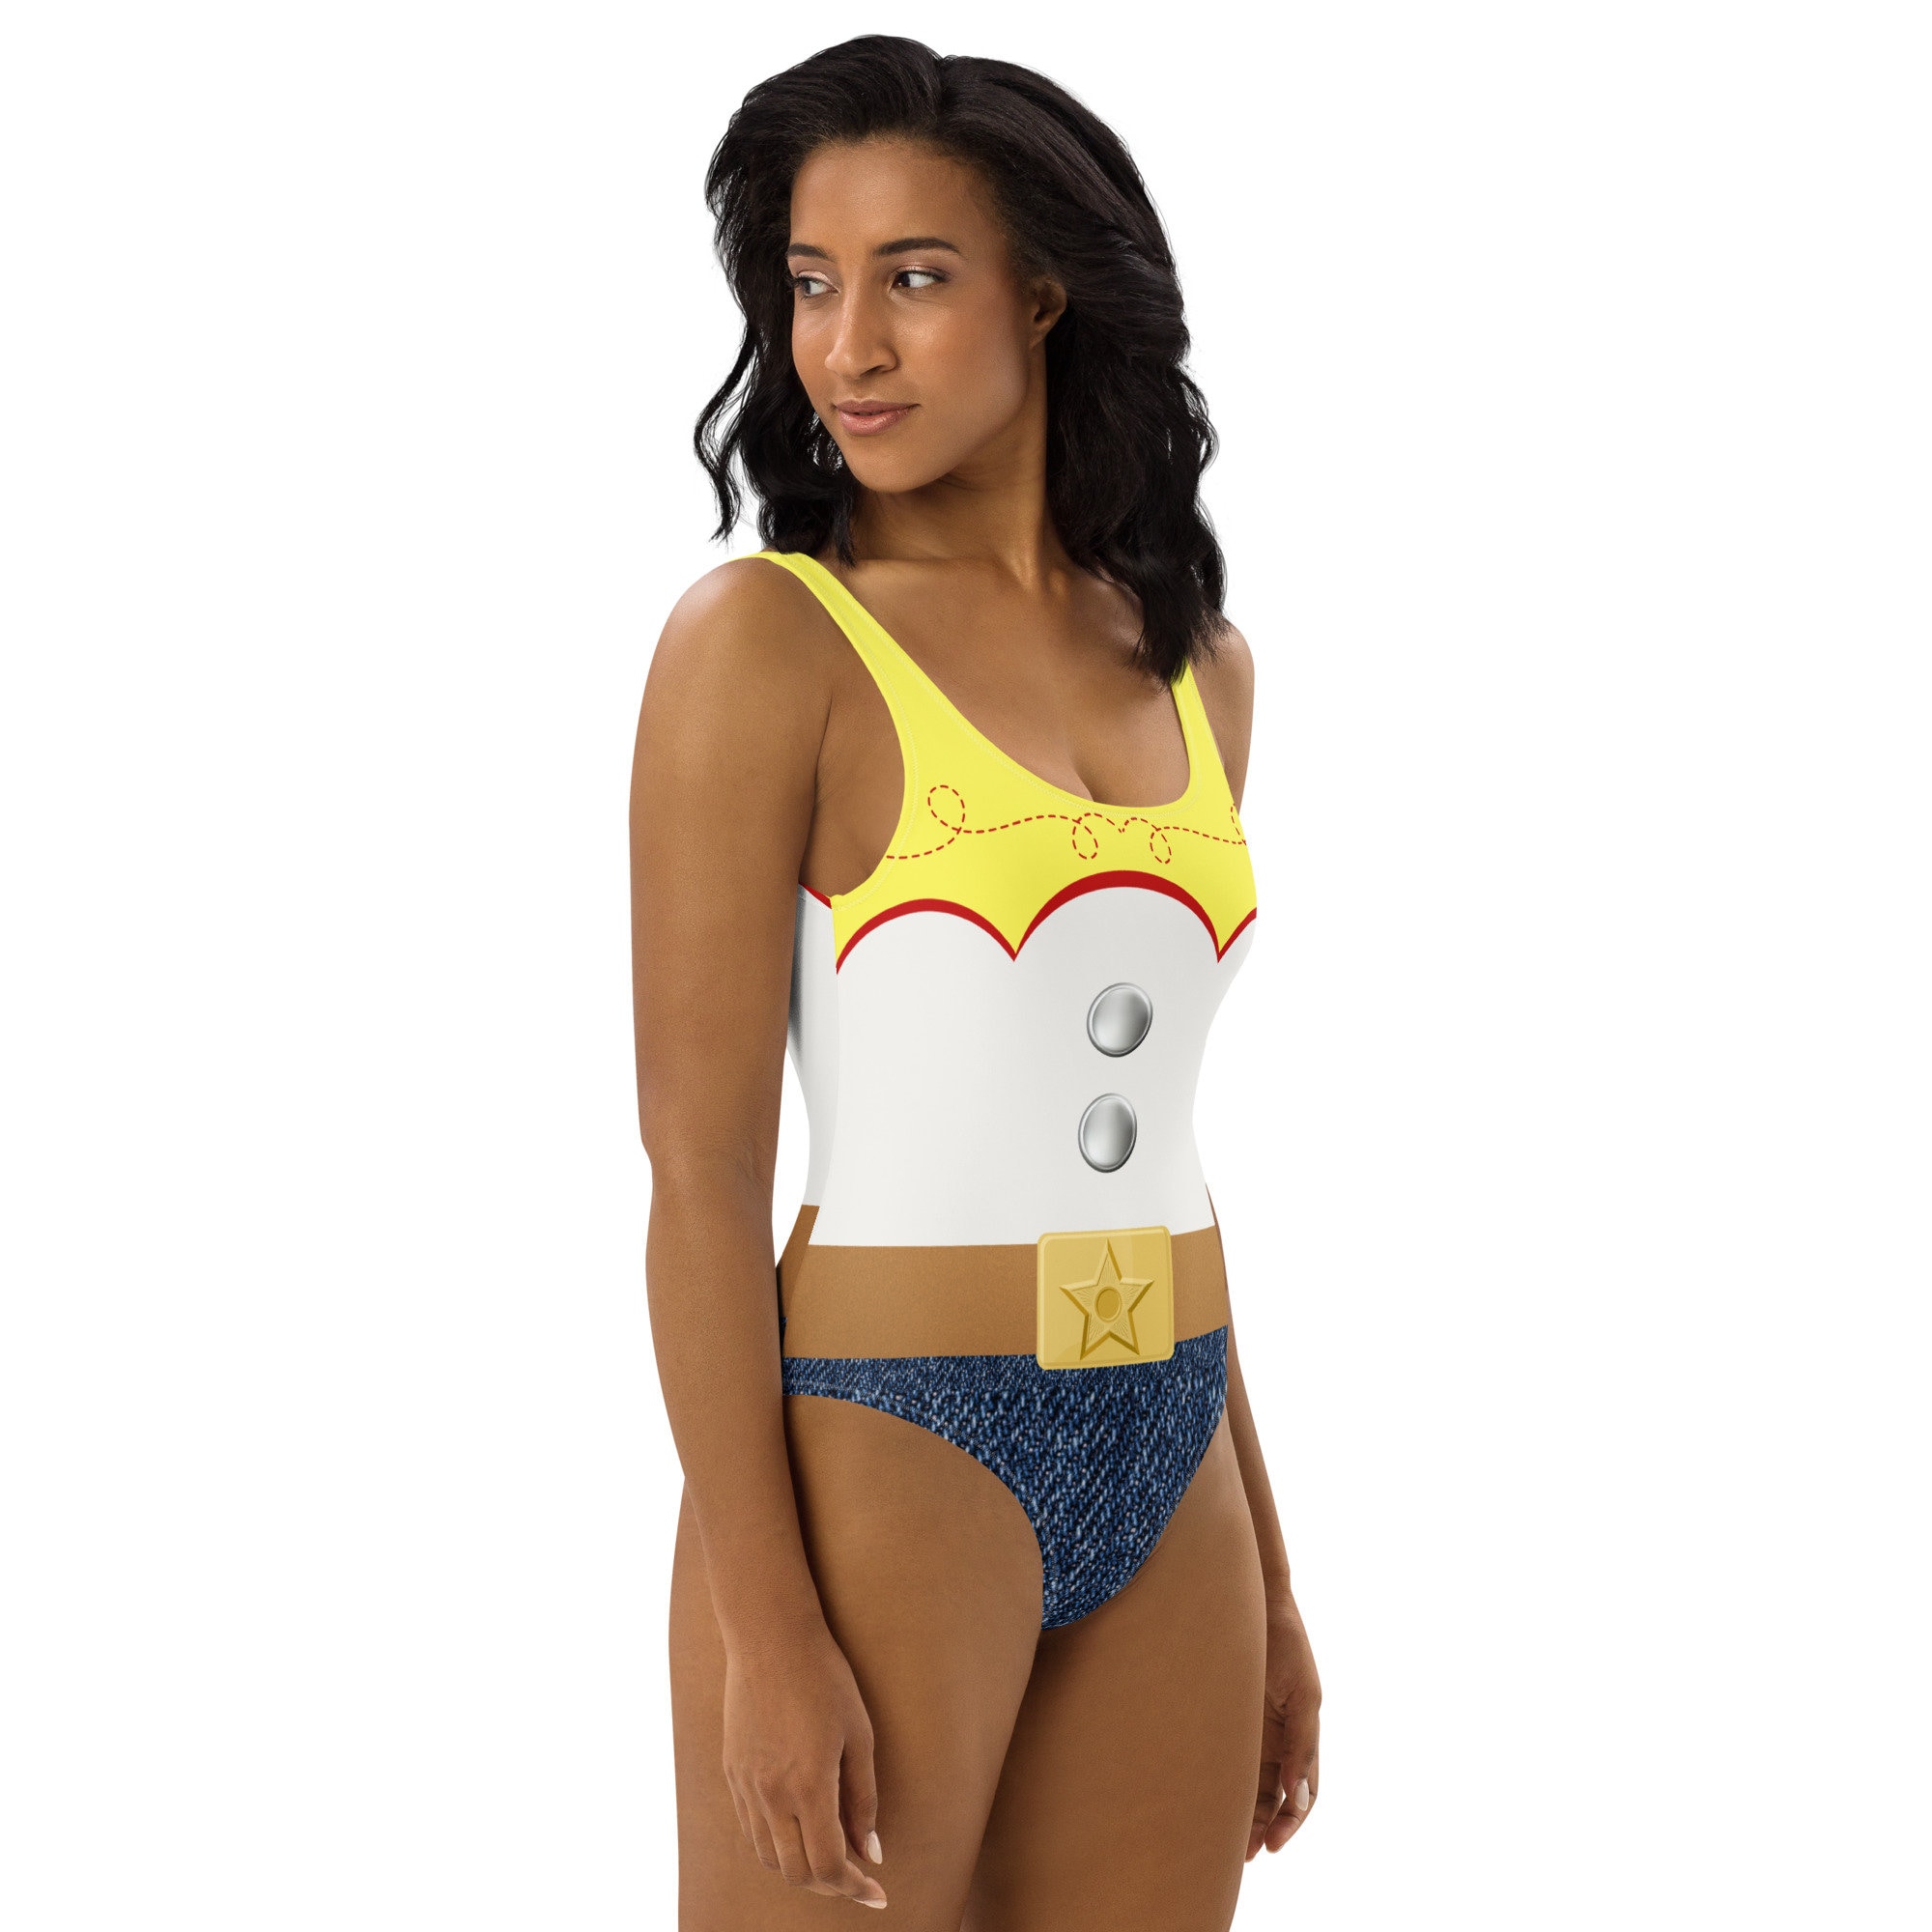 Jessie Toy One-Piece Swimsuit, Disney Vacation outfit